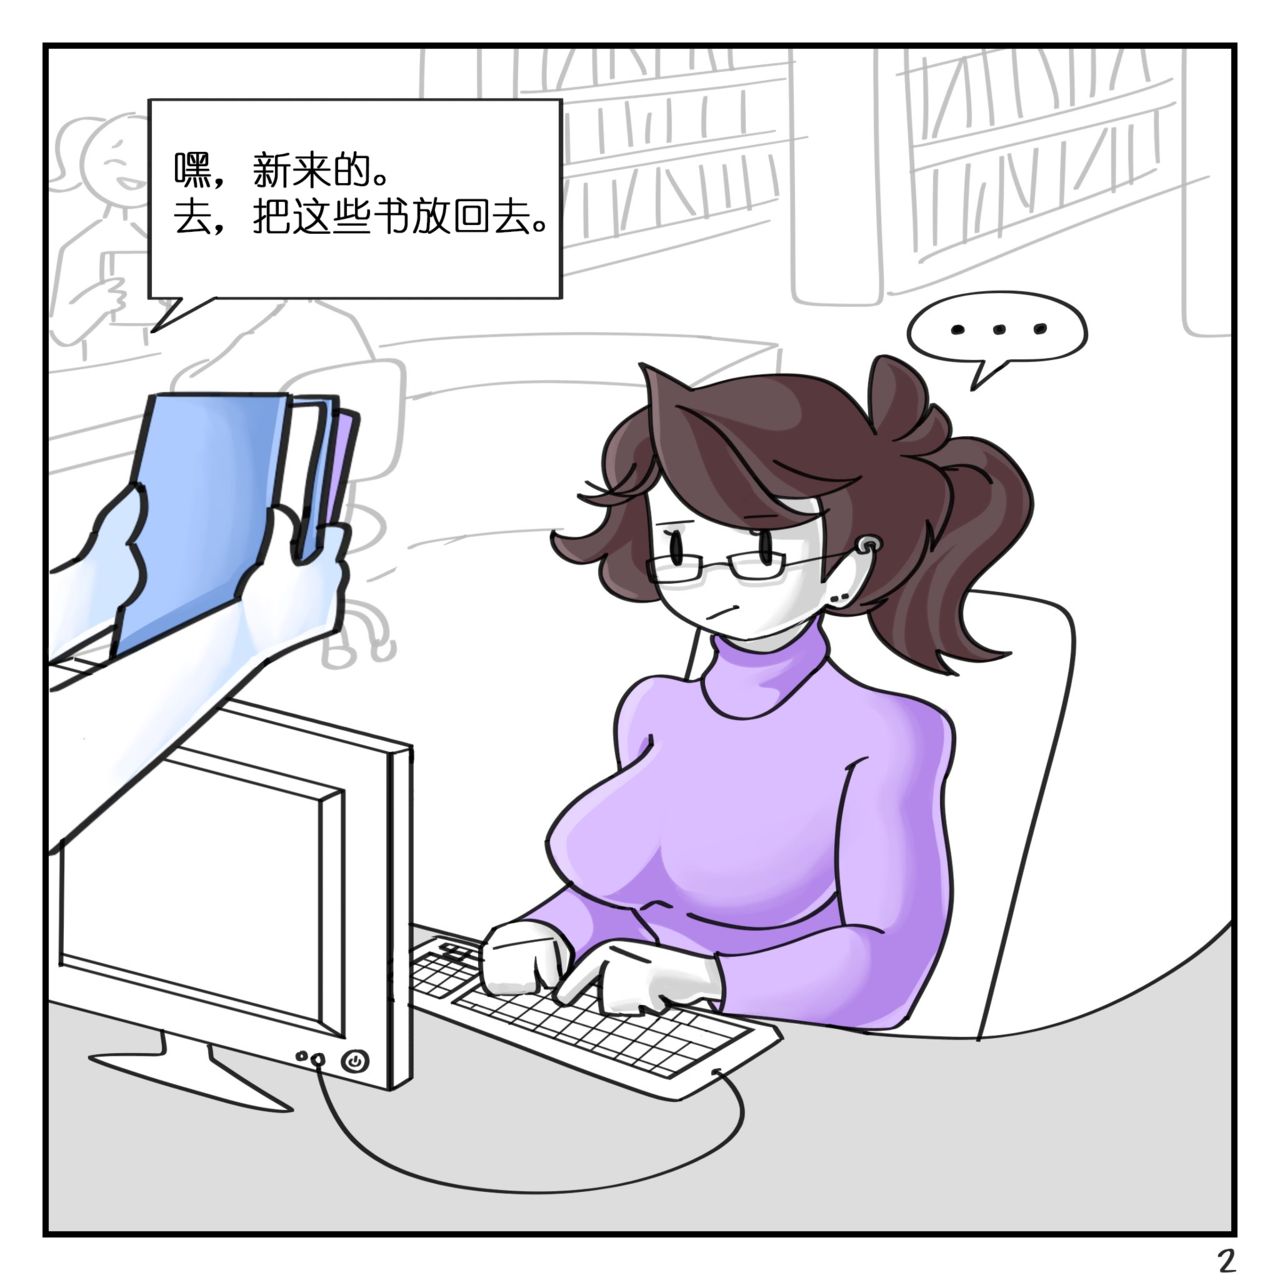 [Anor3xiA]Beyond the Shelves - jaiden (Chinese) 